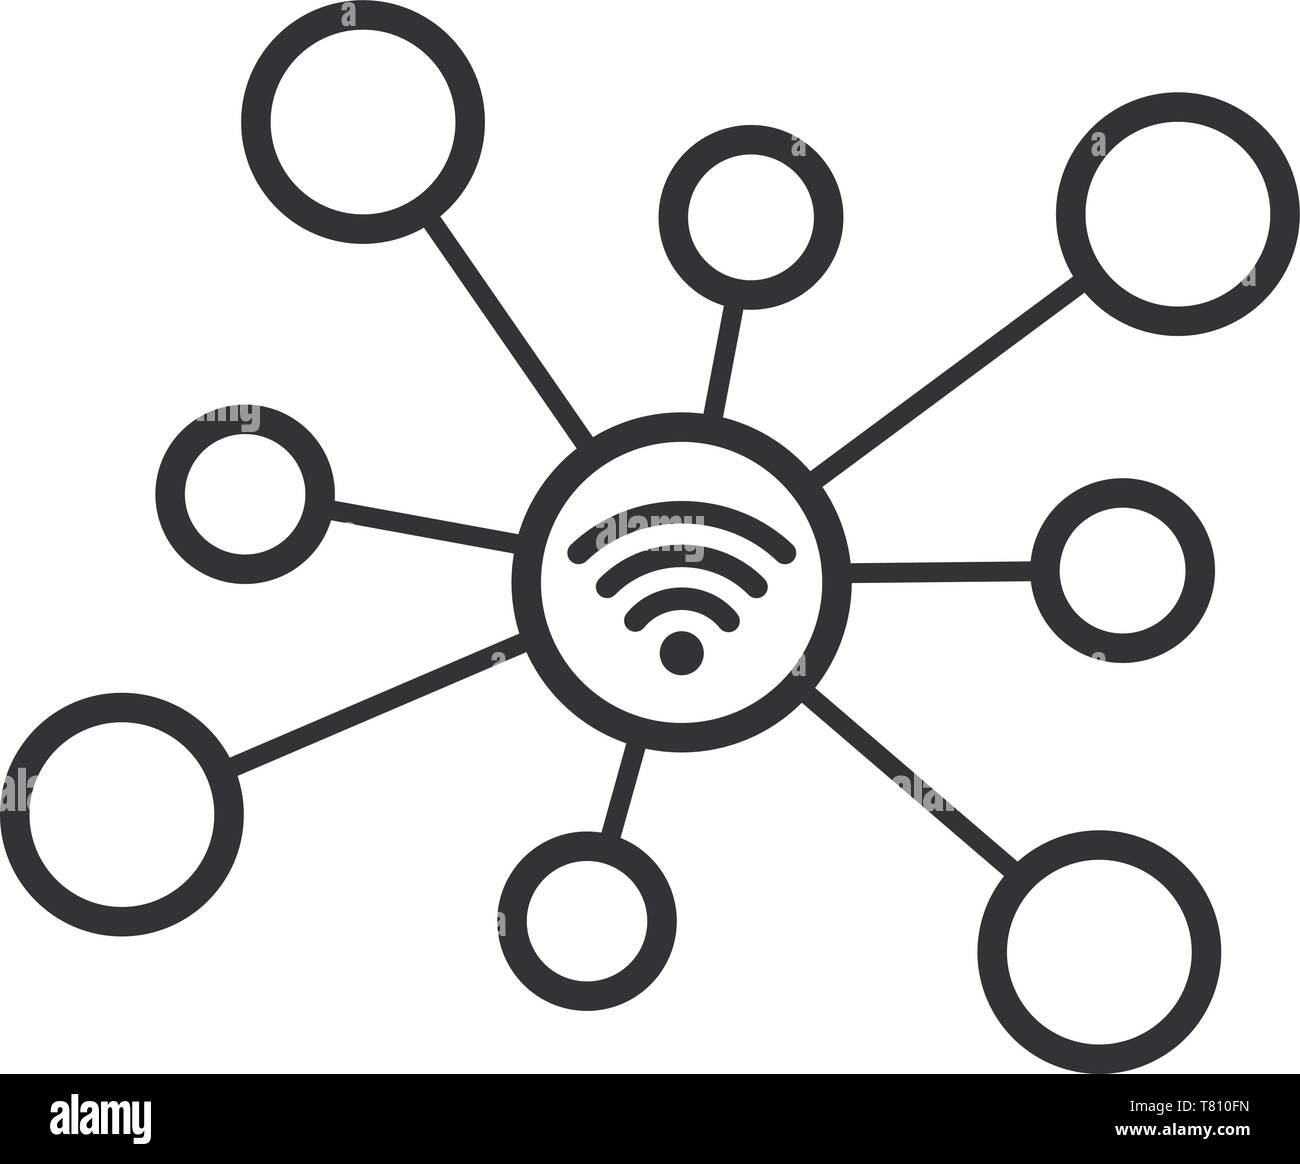 Internet of things wifi connections concept art vector icon symbol Stock Vector